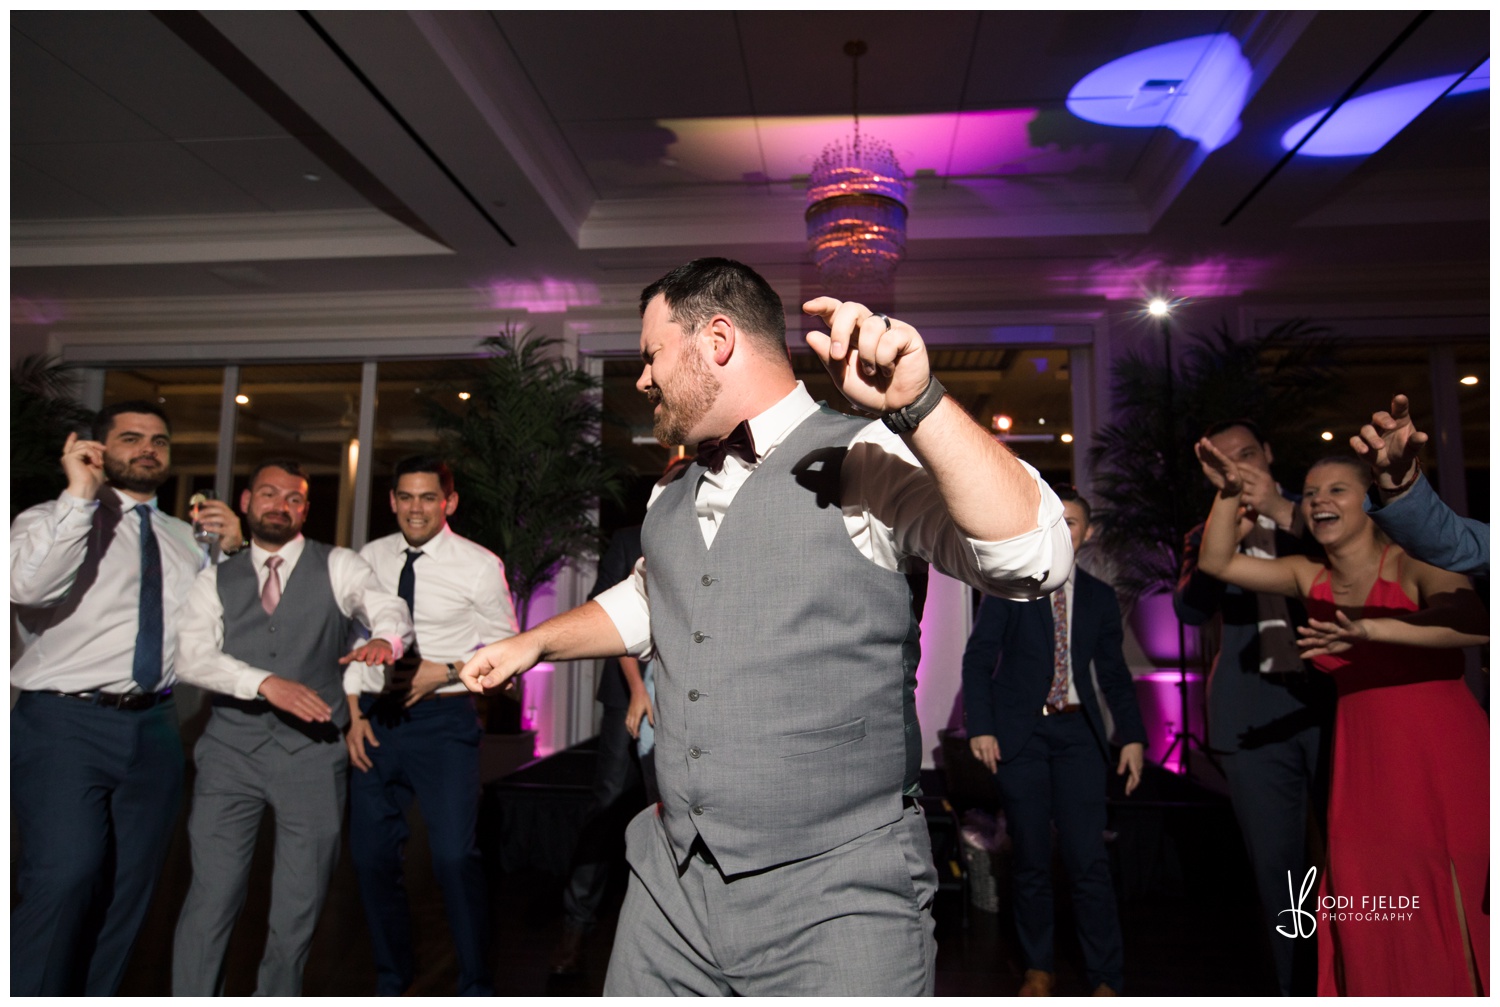 groom getting down to some great music